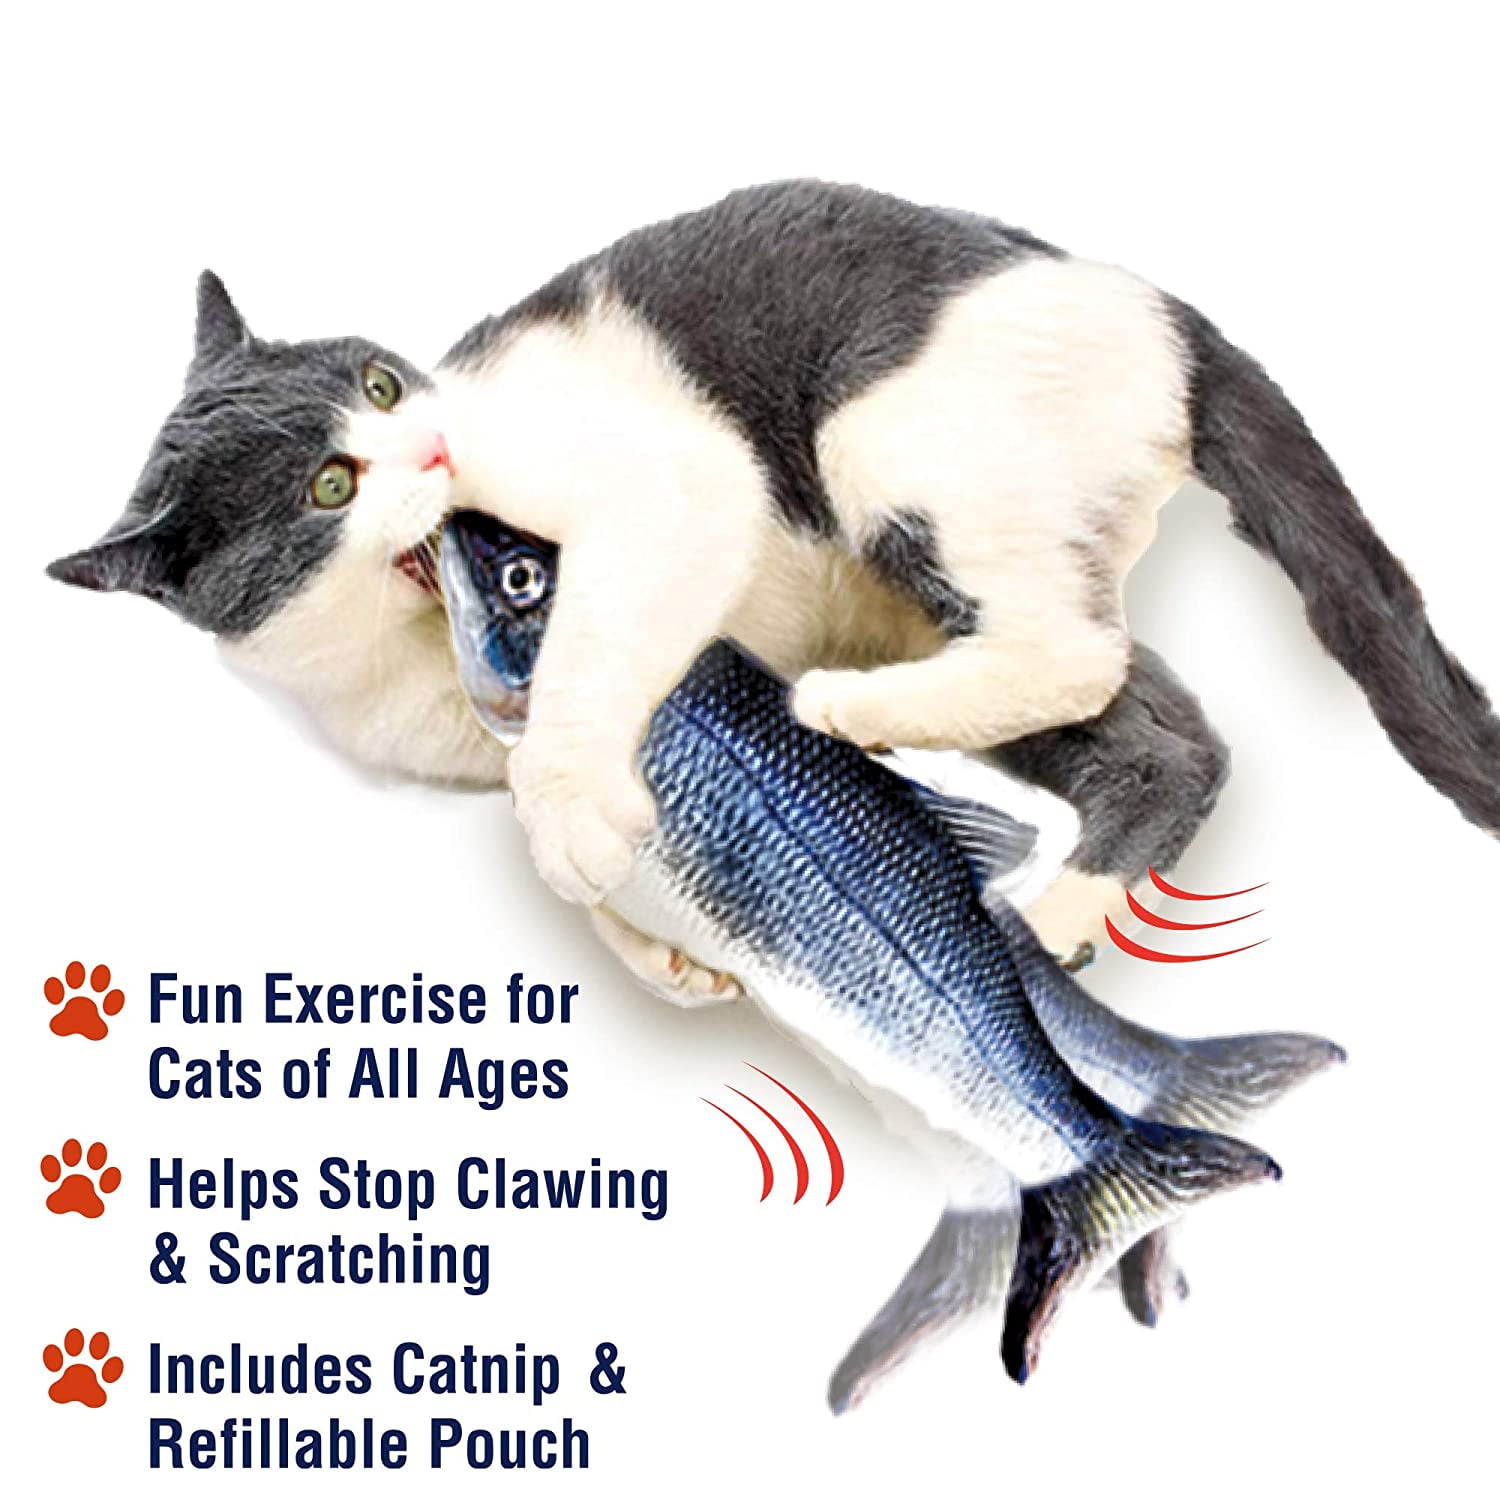 Flops and Wiggles Flips Fun Fish Cat Toy- Motion Activated USB Charge 